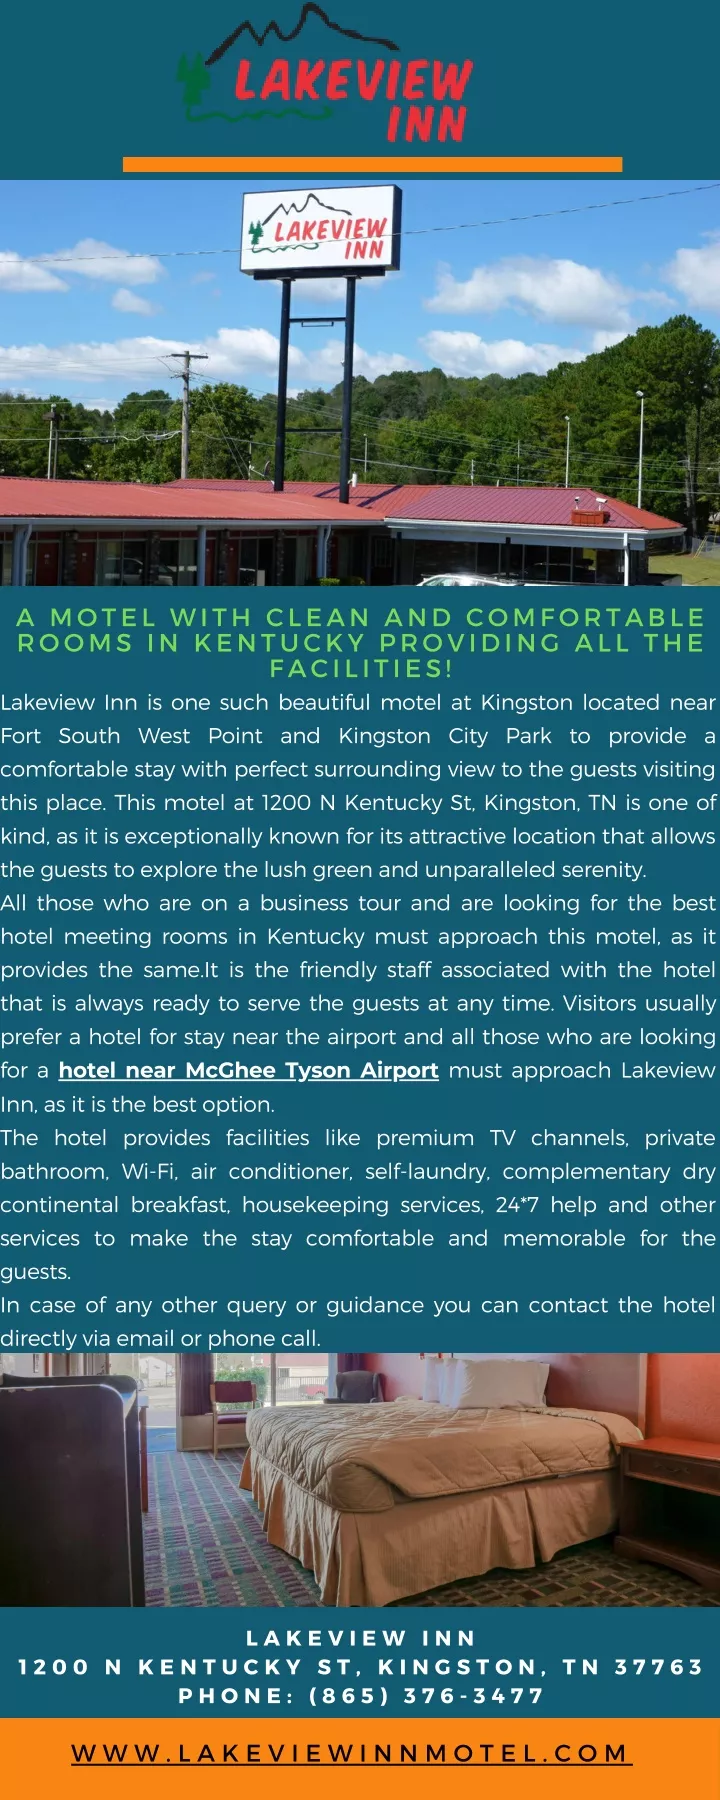 a motel with clean and comfortable rooms